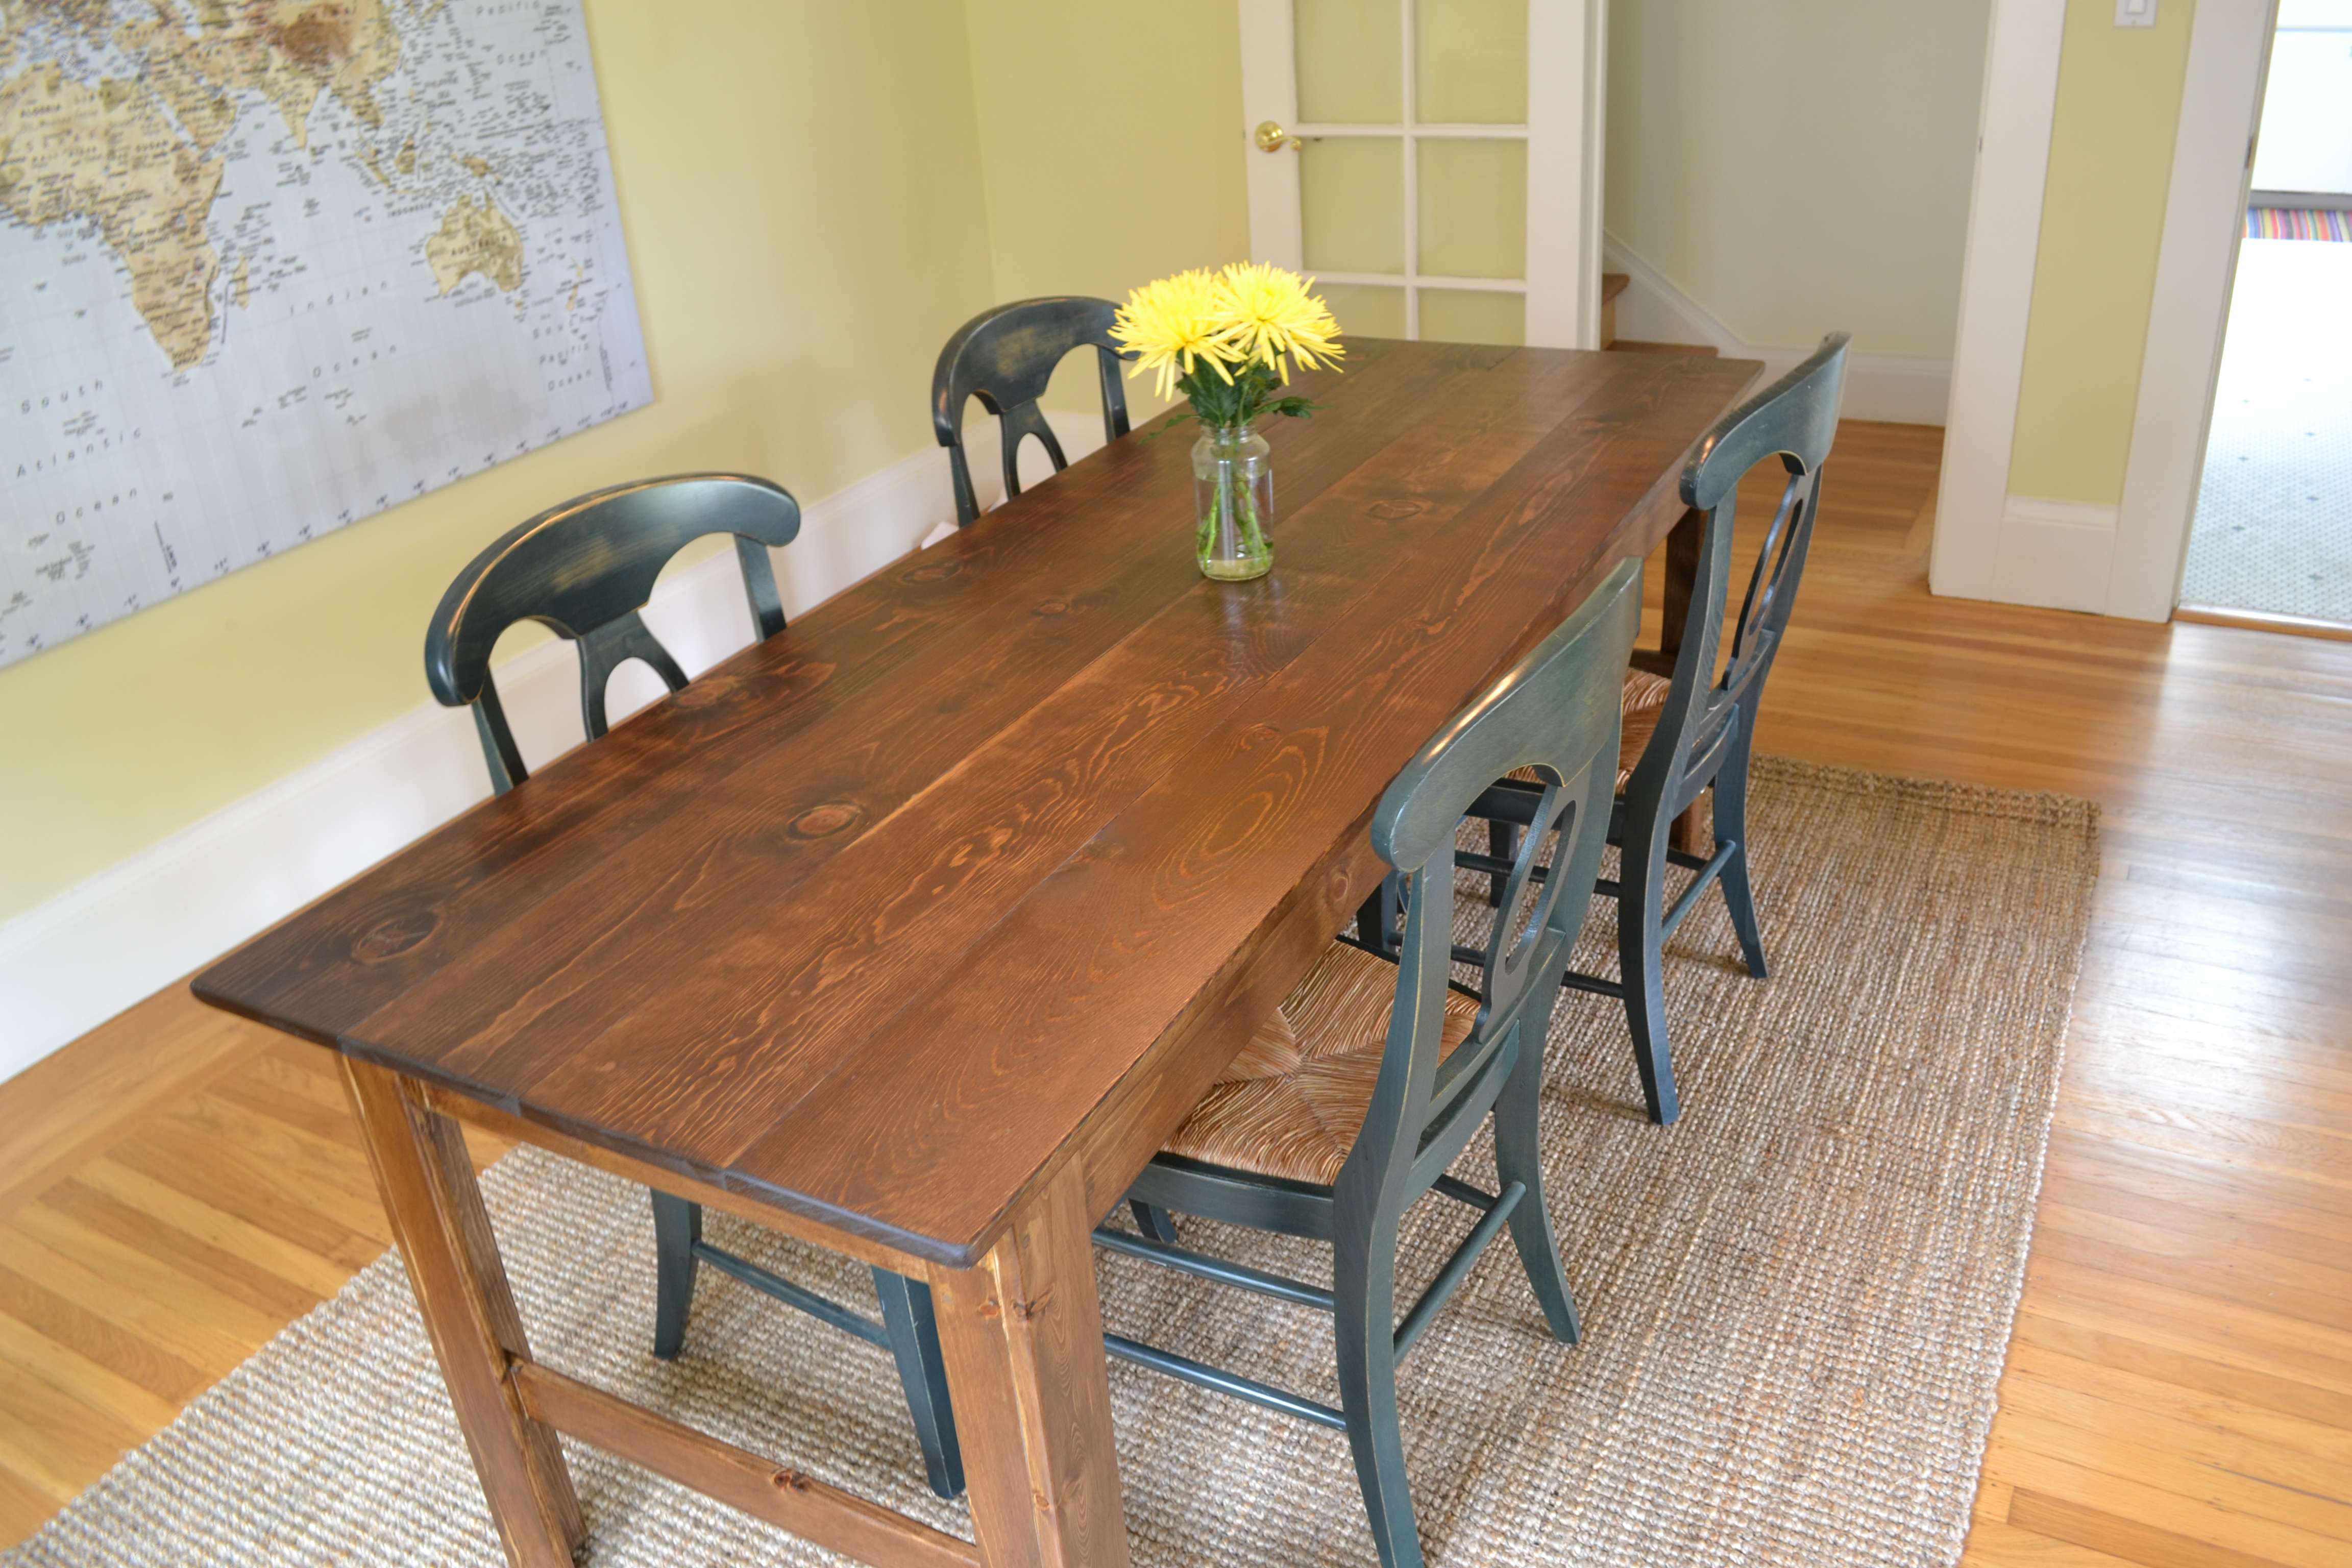 width of dining room tables